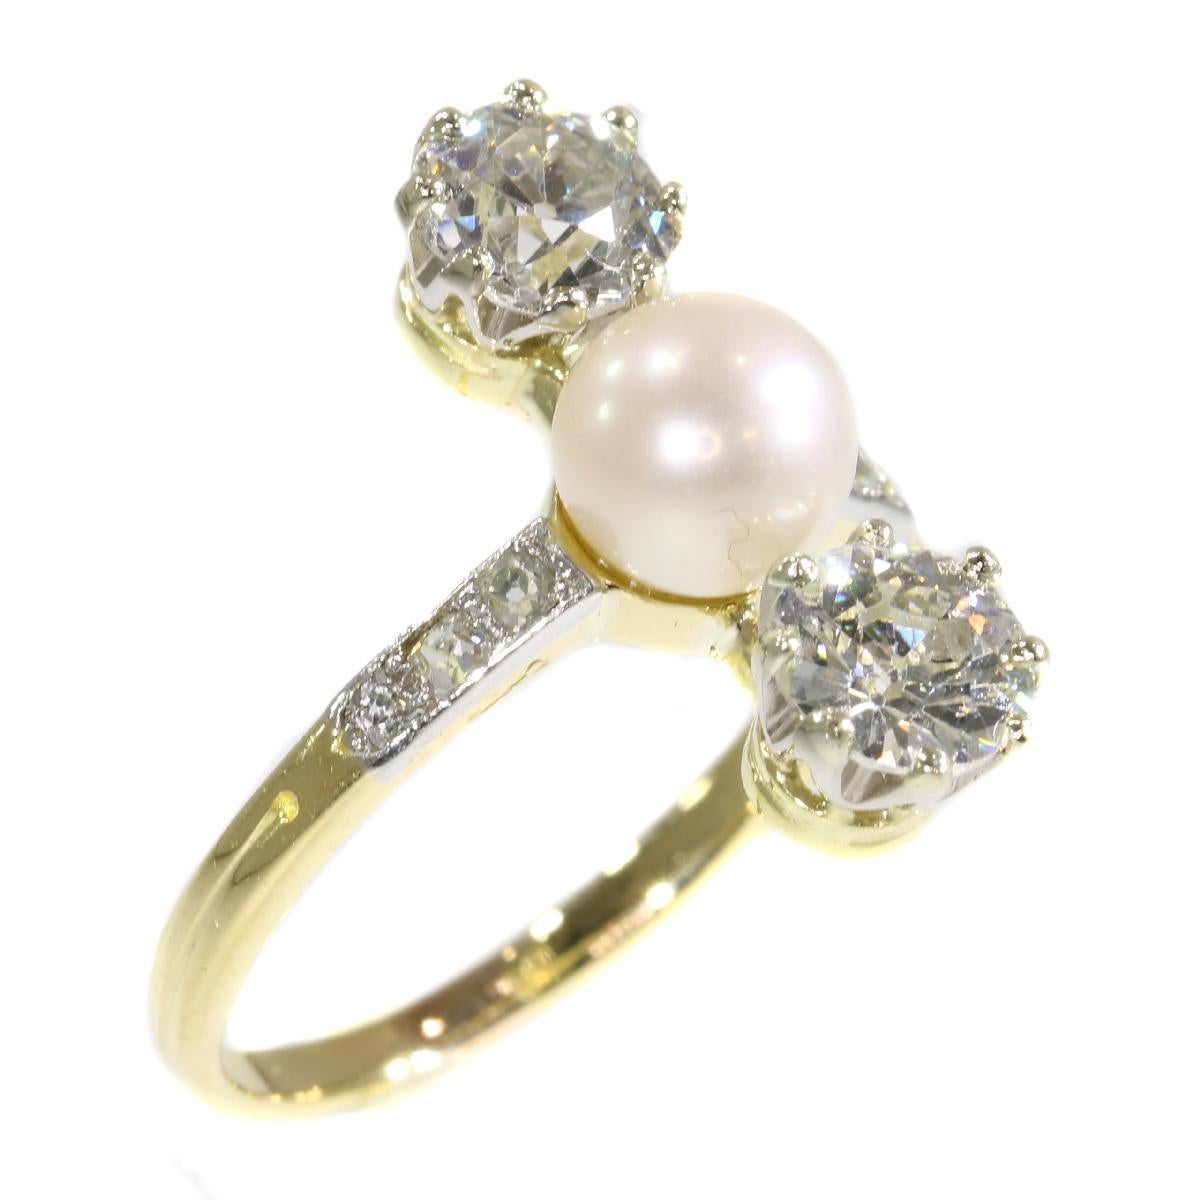 Vintage Diamond and Pearl Engagement Ring Belle Epoque Period In Excellent Condition For Sale In Antwerp, BE